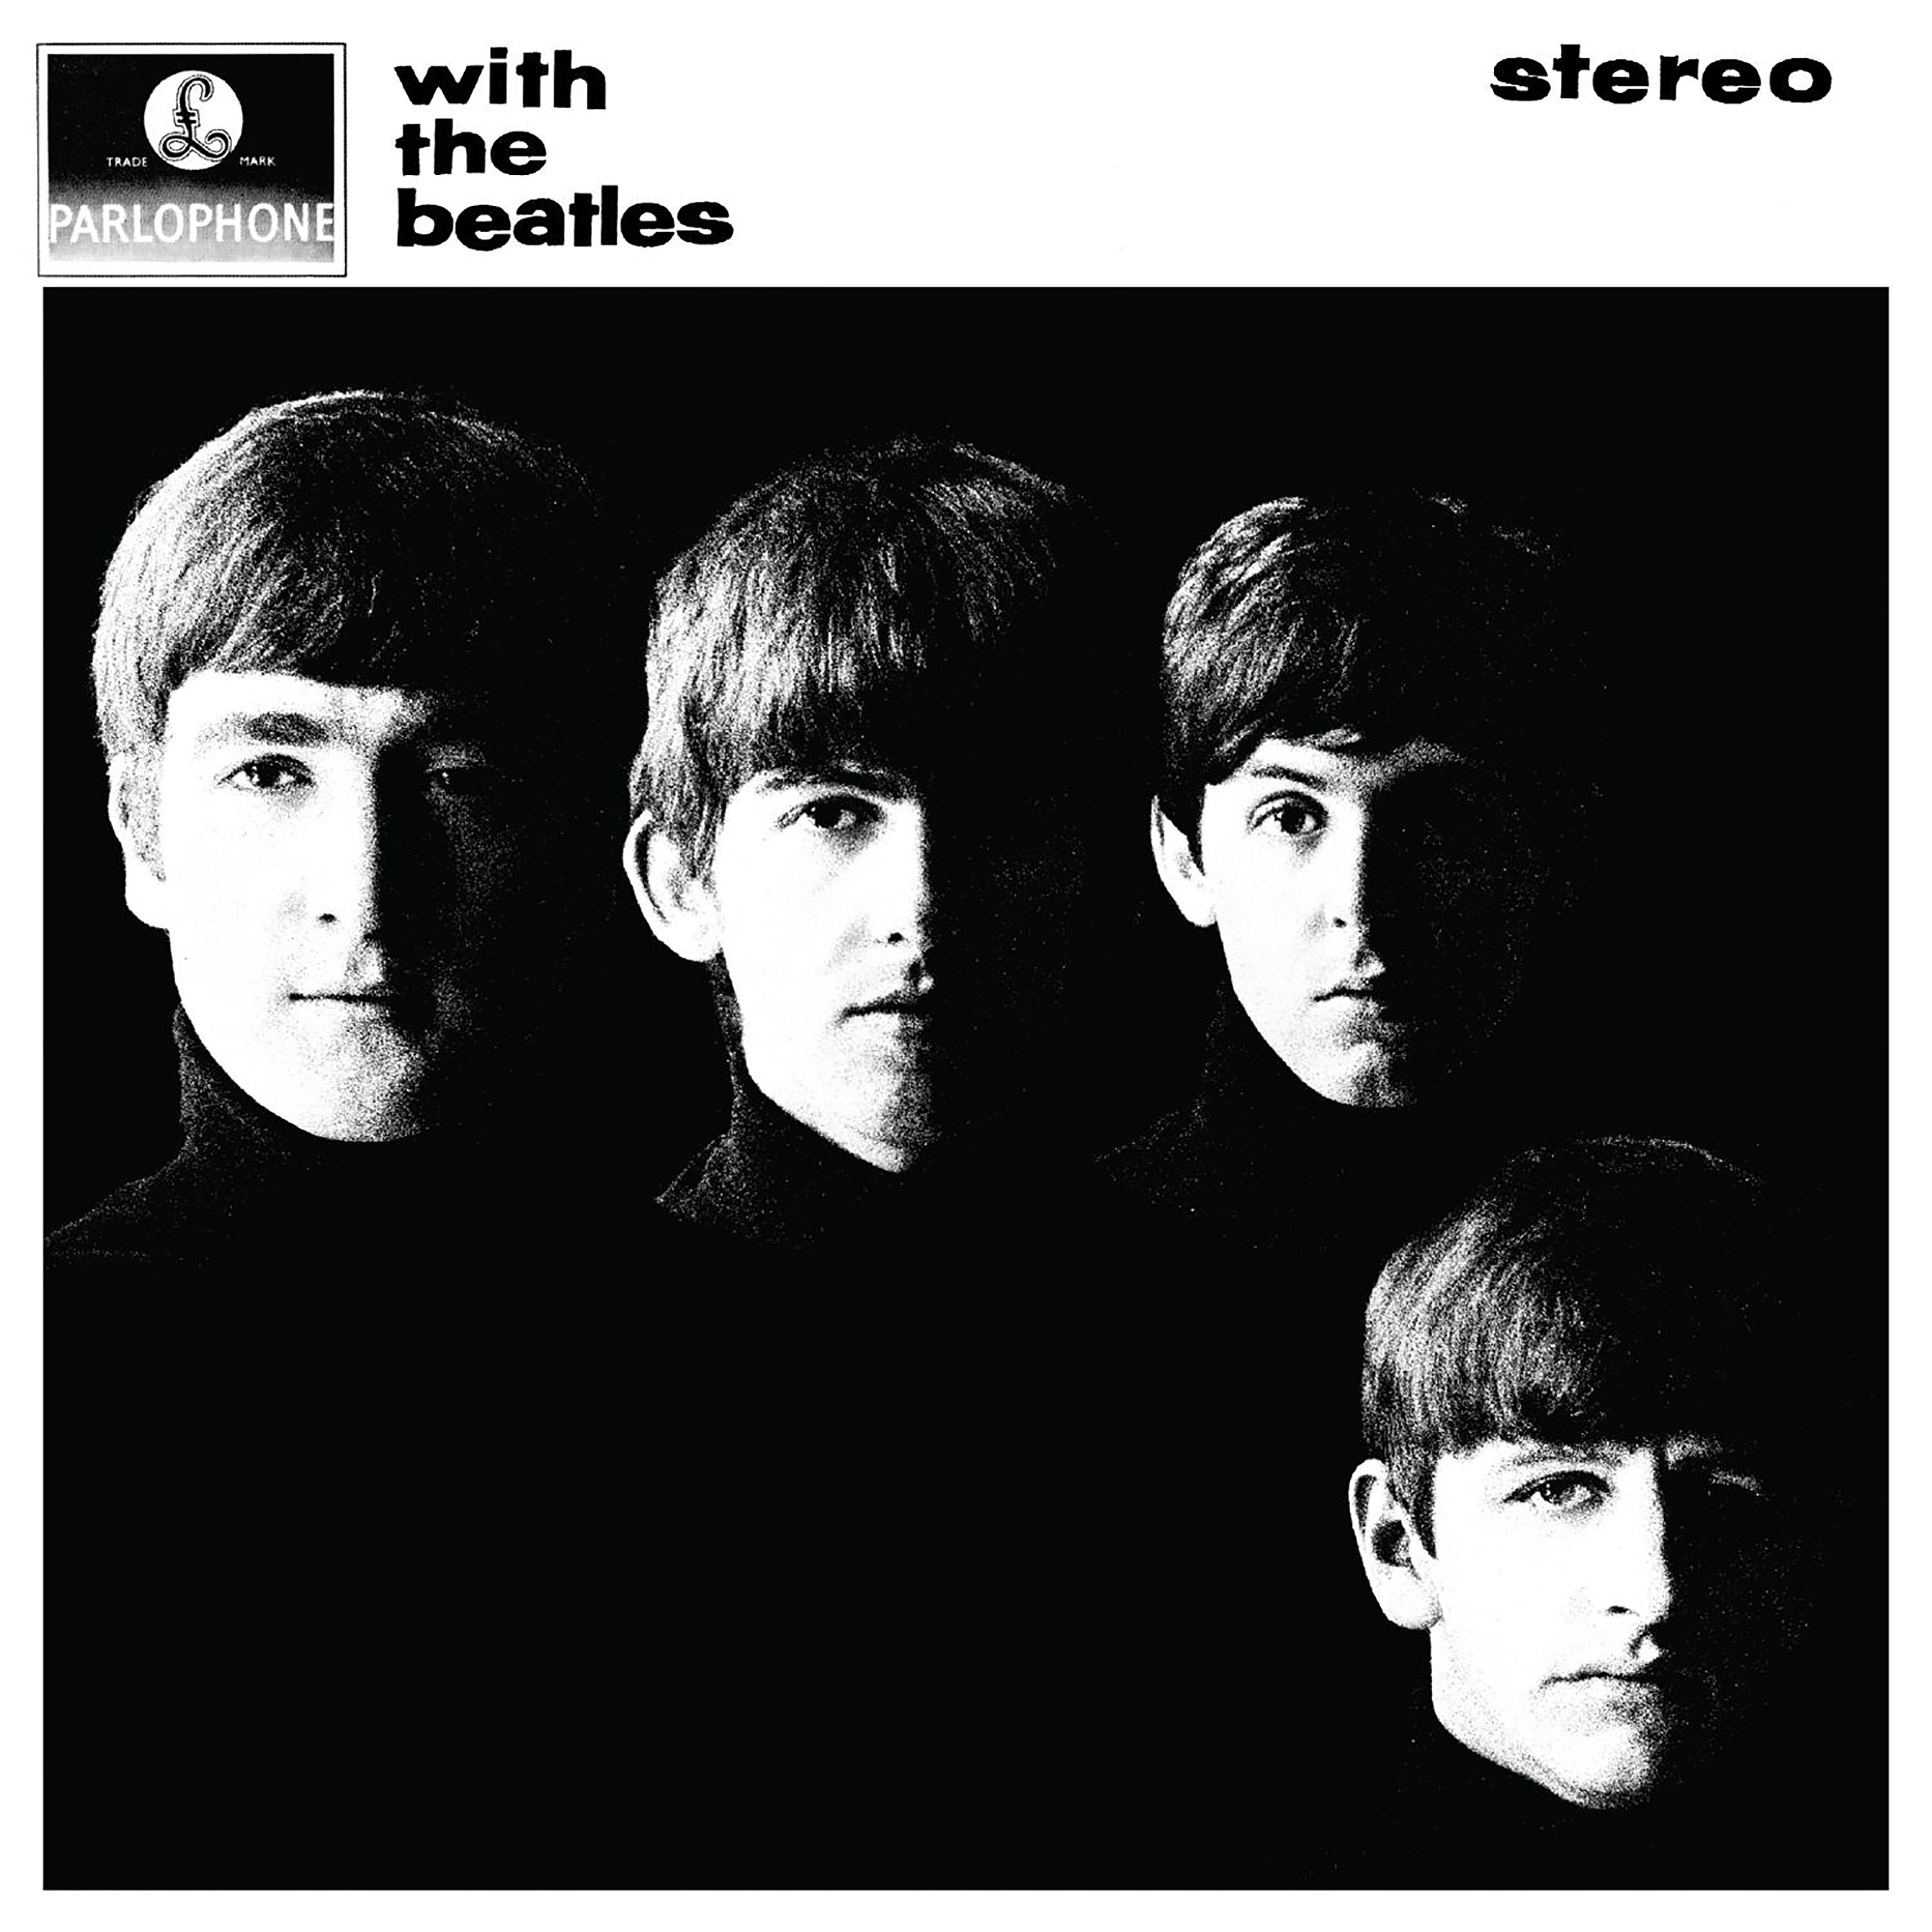 With the Beatles | The Beatles Wiki | Fandom